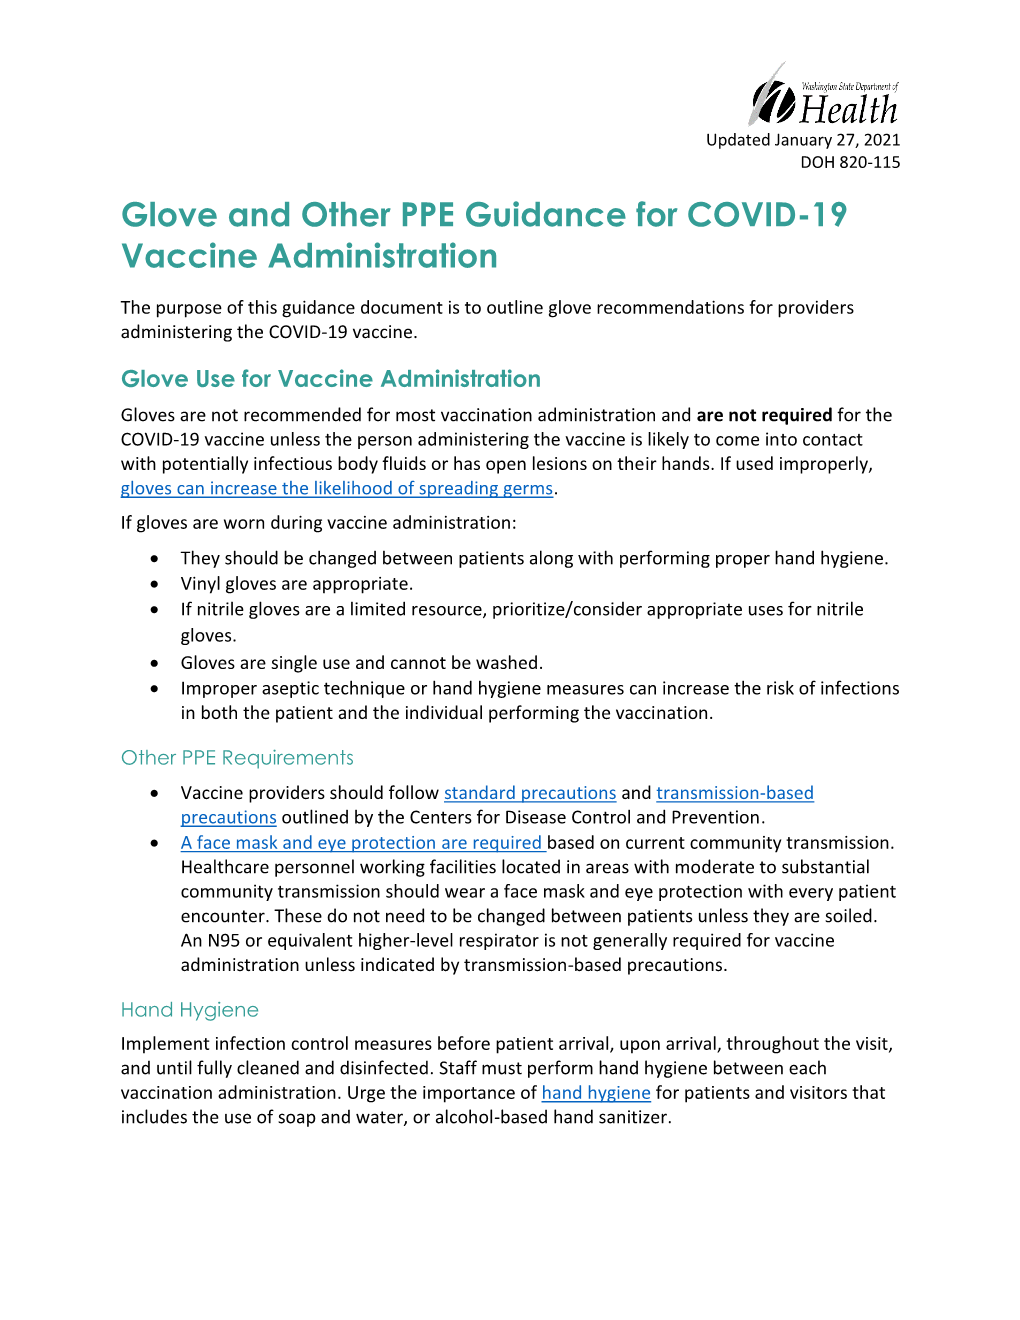 Glove and Other PPE Guidance for COVID-19 Vaccine Administration